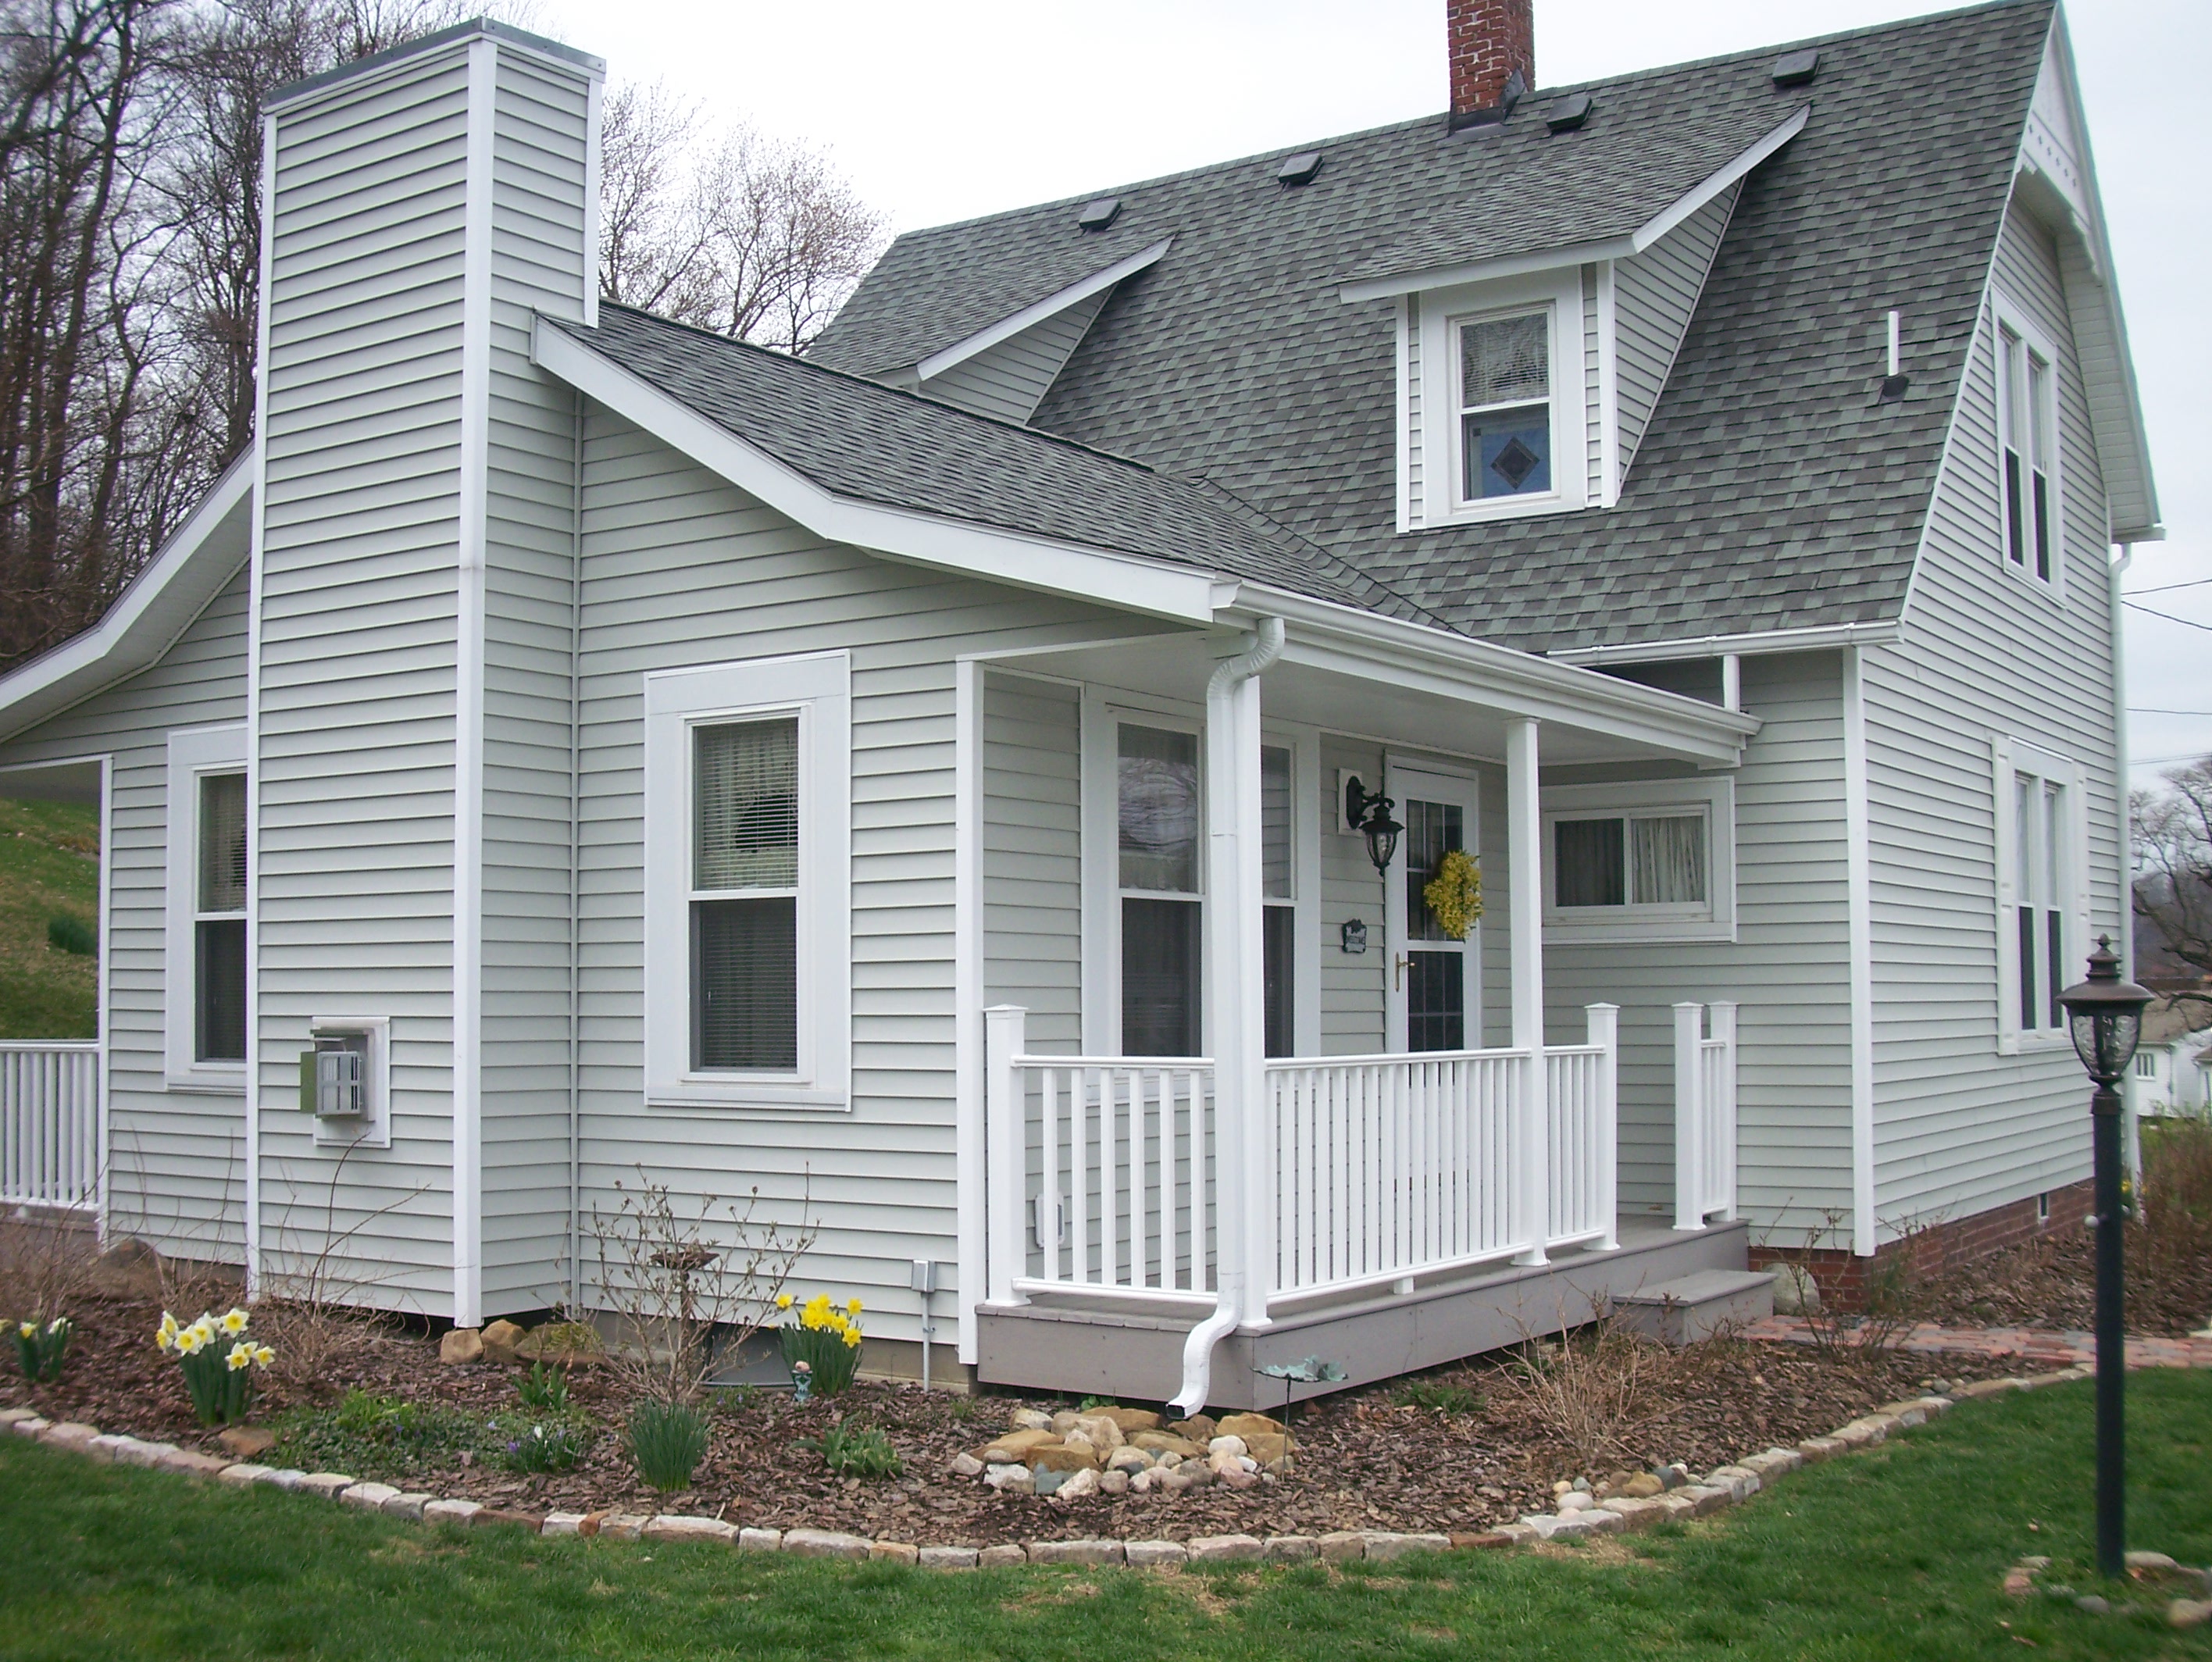 BUILT ROOM ADDITION TO MATCH THE HOUSE STYLE, INSTALLED NEW ROOF, SIDING & WINDOWS. The Home Center, Exterior & Interior Remodeling Circleville (740)474-3250